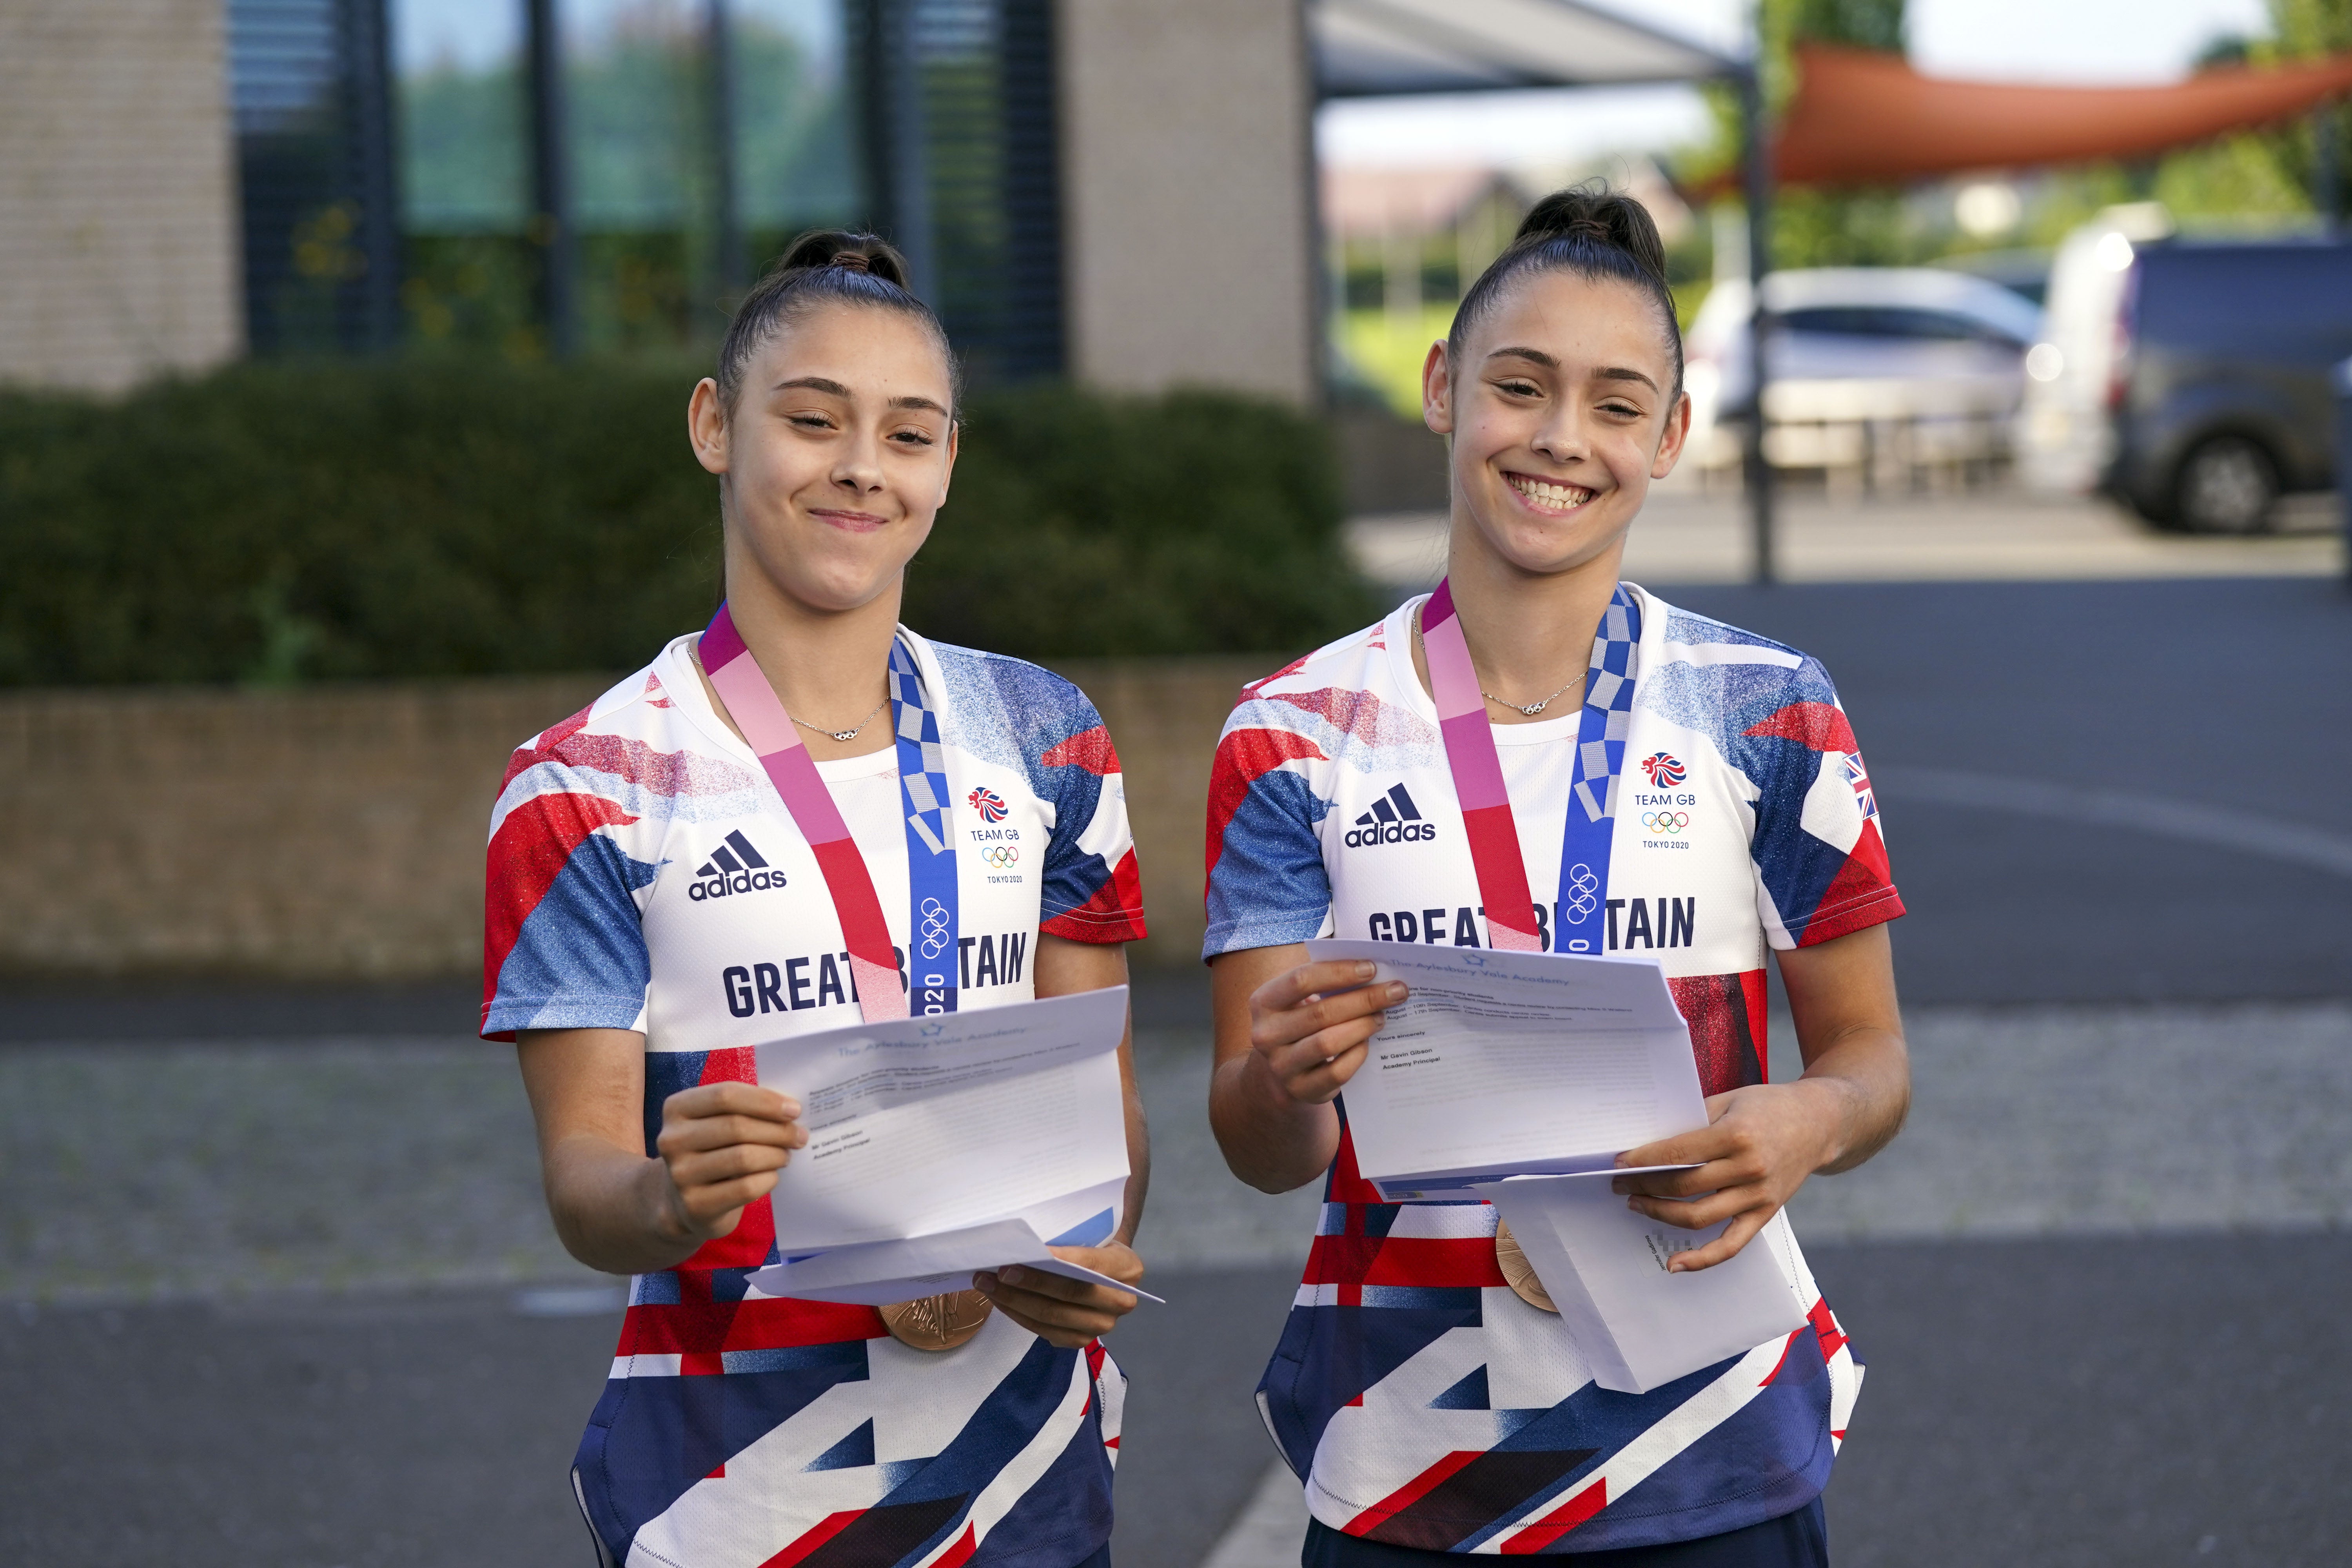 Jessica and Jennifer Gadirova are two of GB’s best medal chances at the World Champs